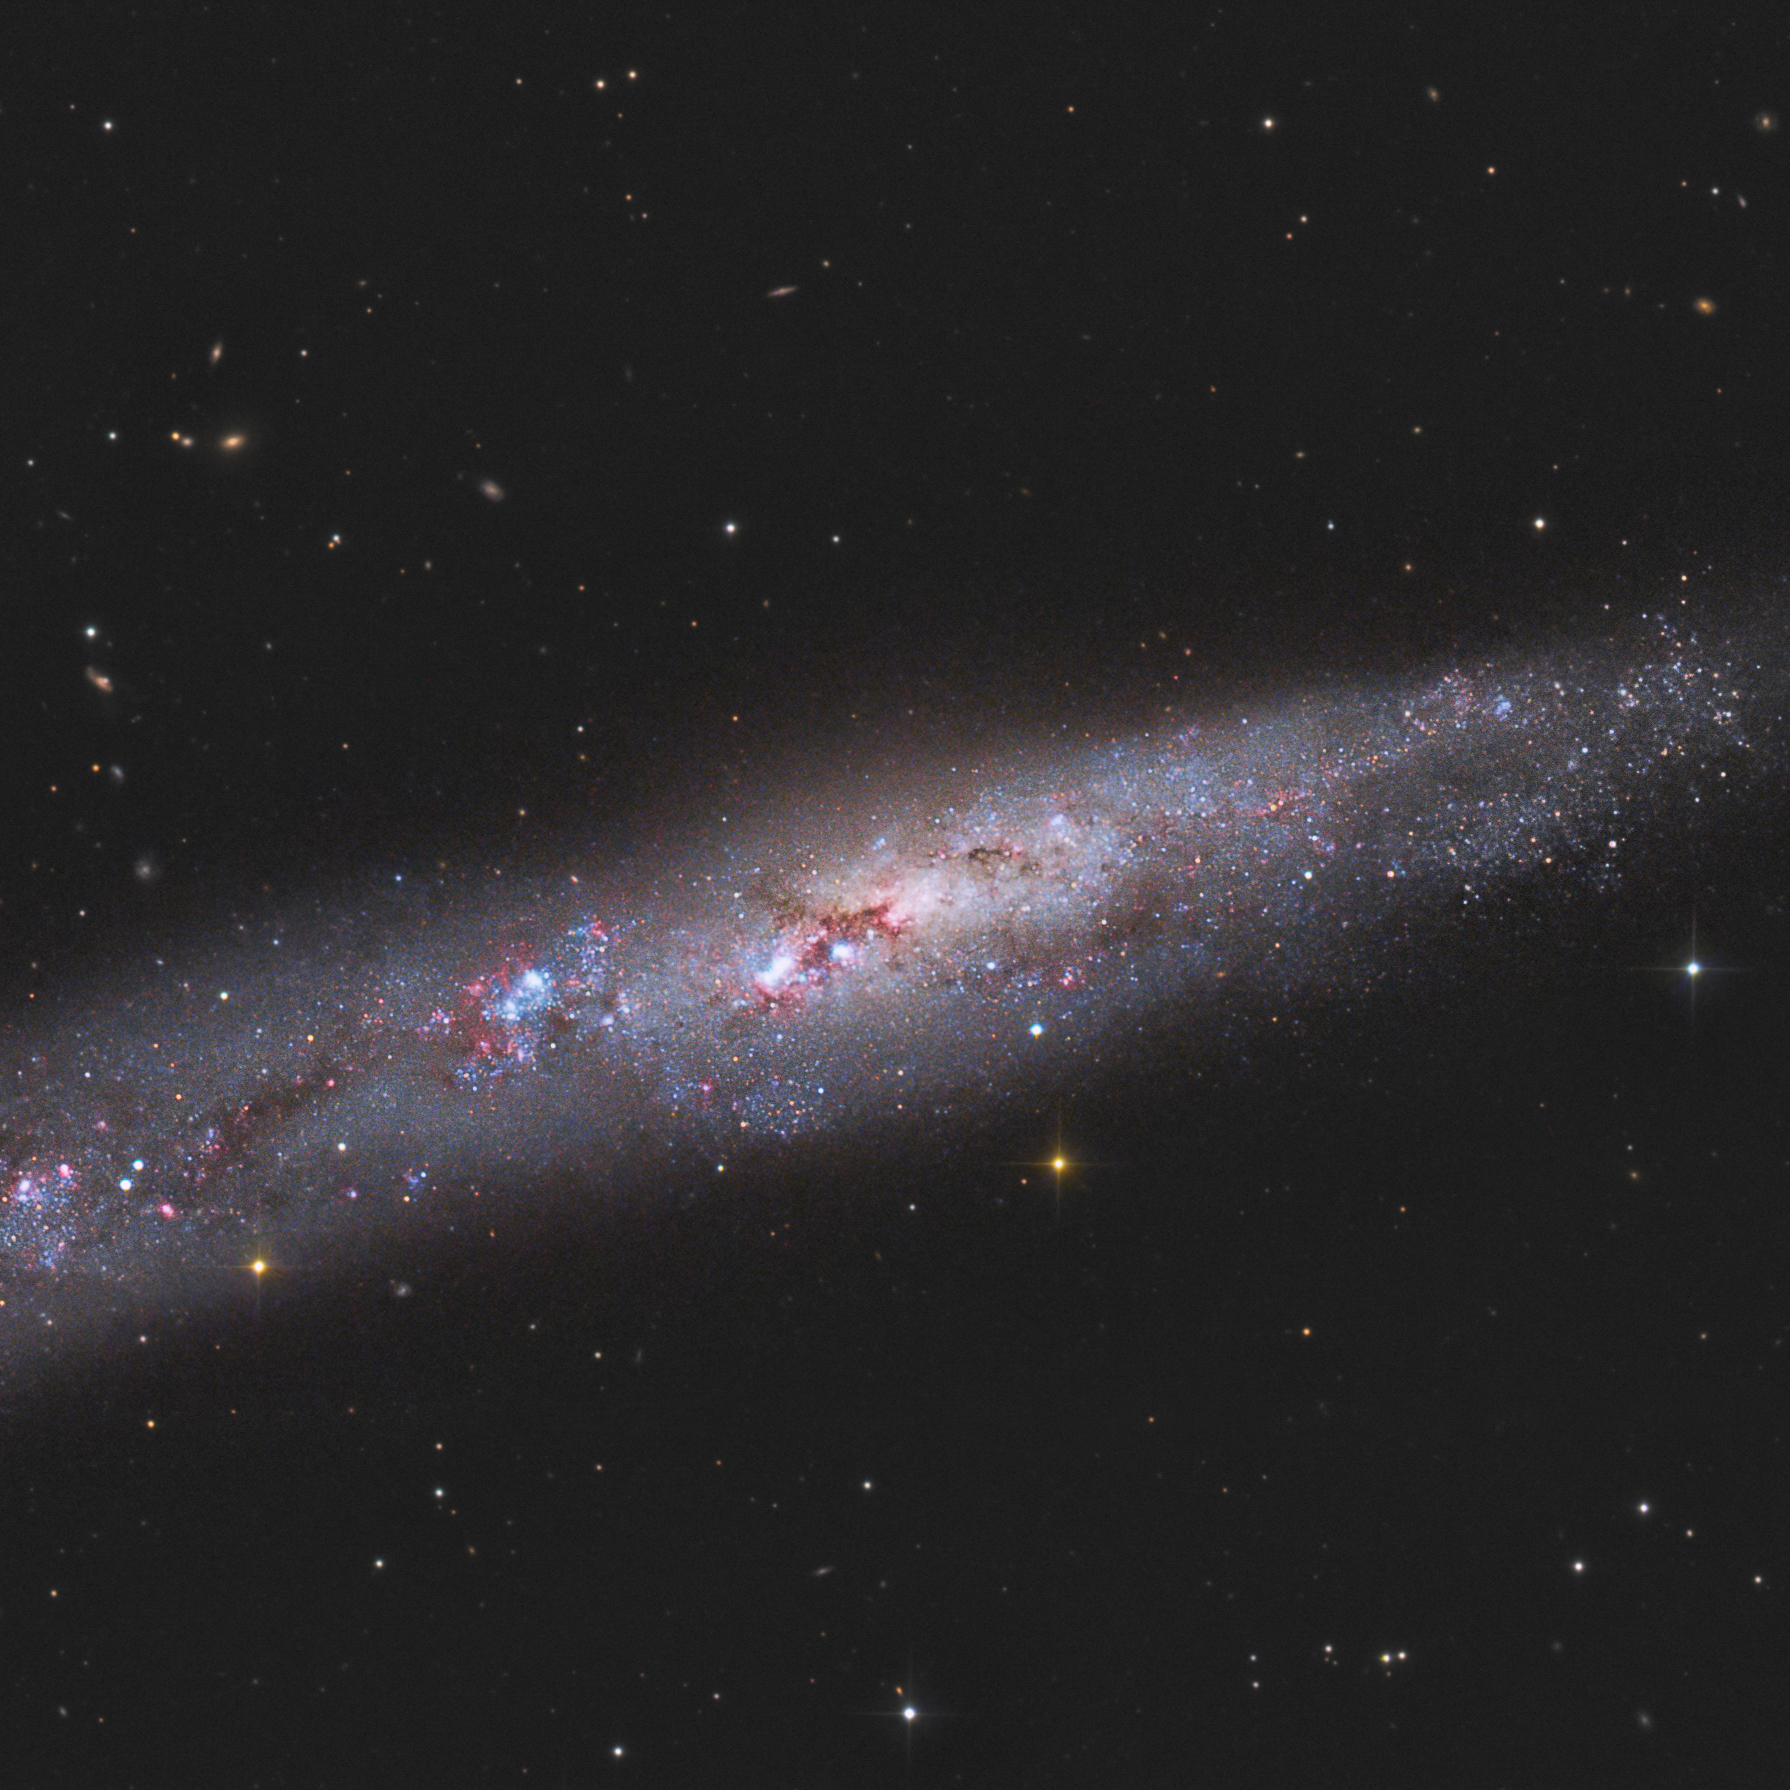 The Whale Galaxy – NGC 55